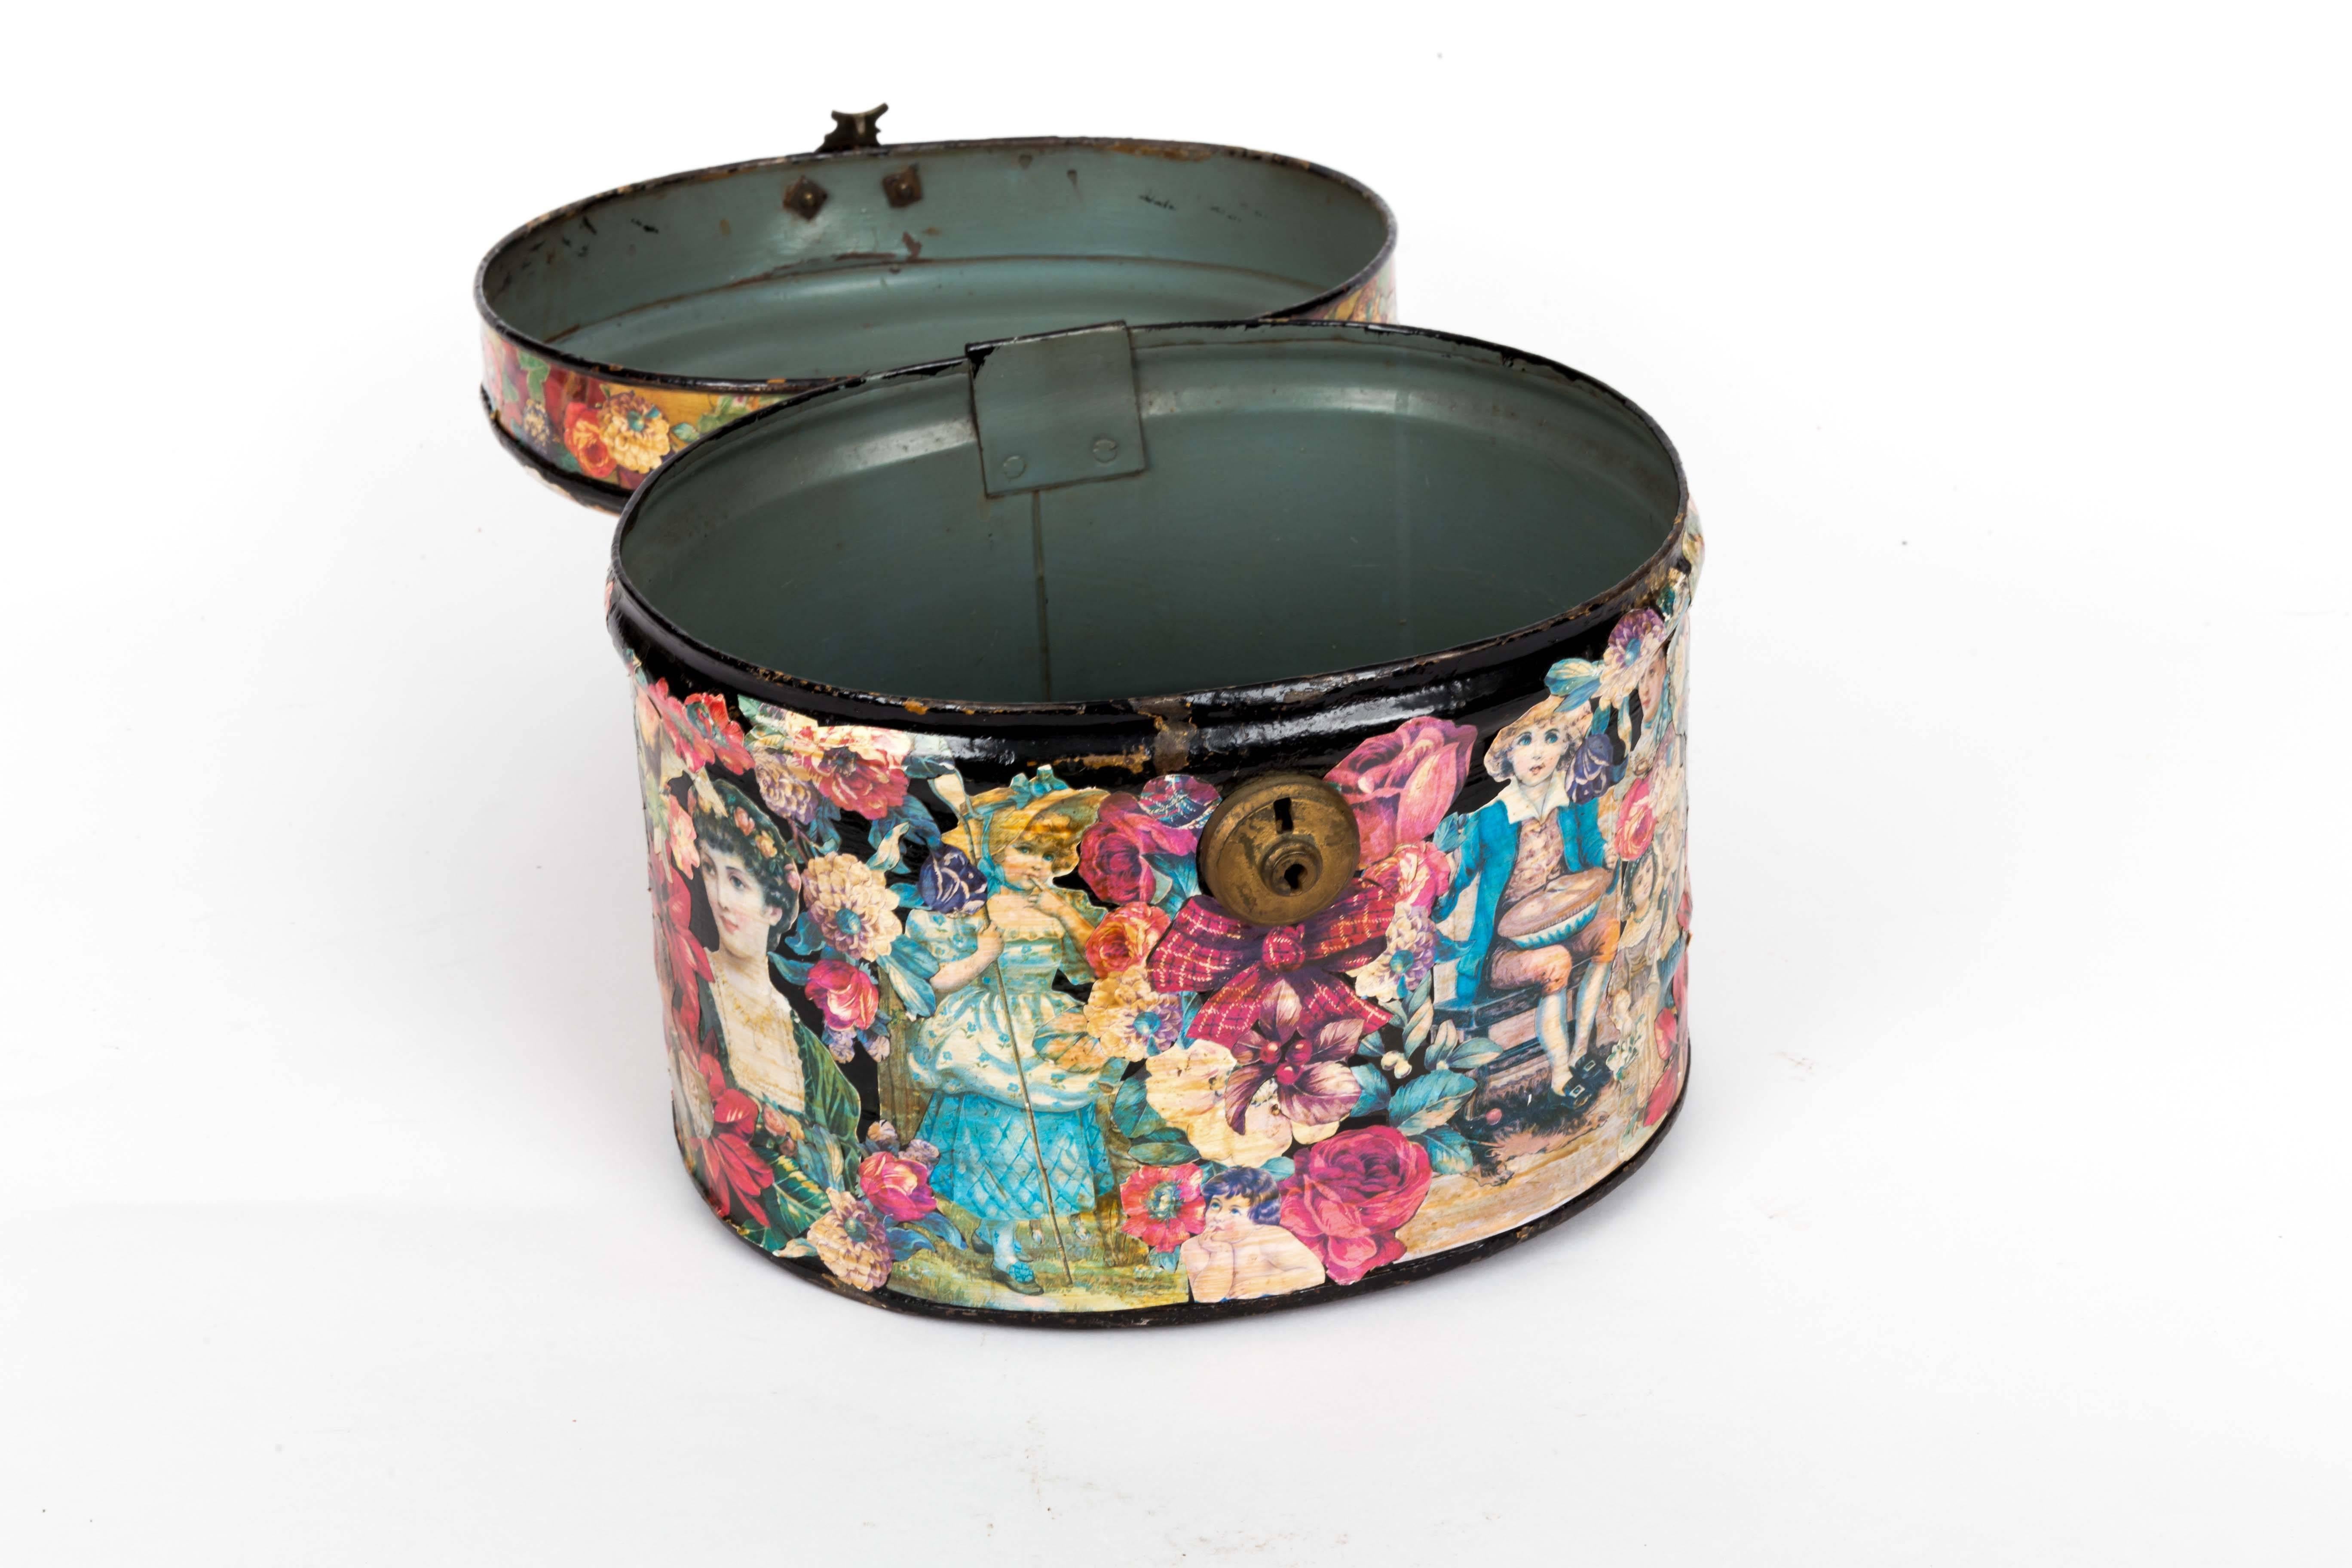 19th century Decoupage Tole hat box with colorful paper cut-out.